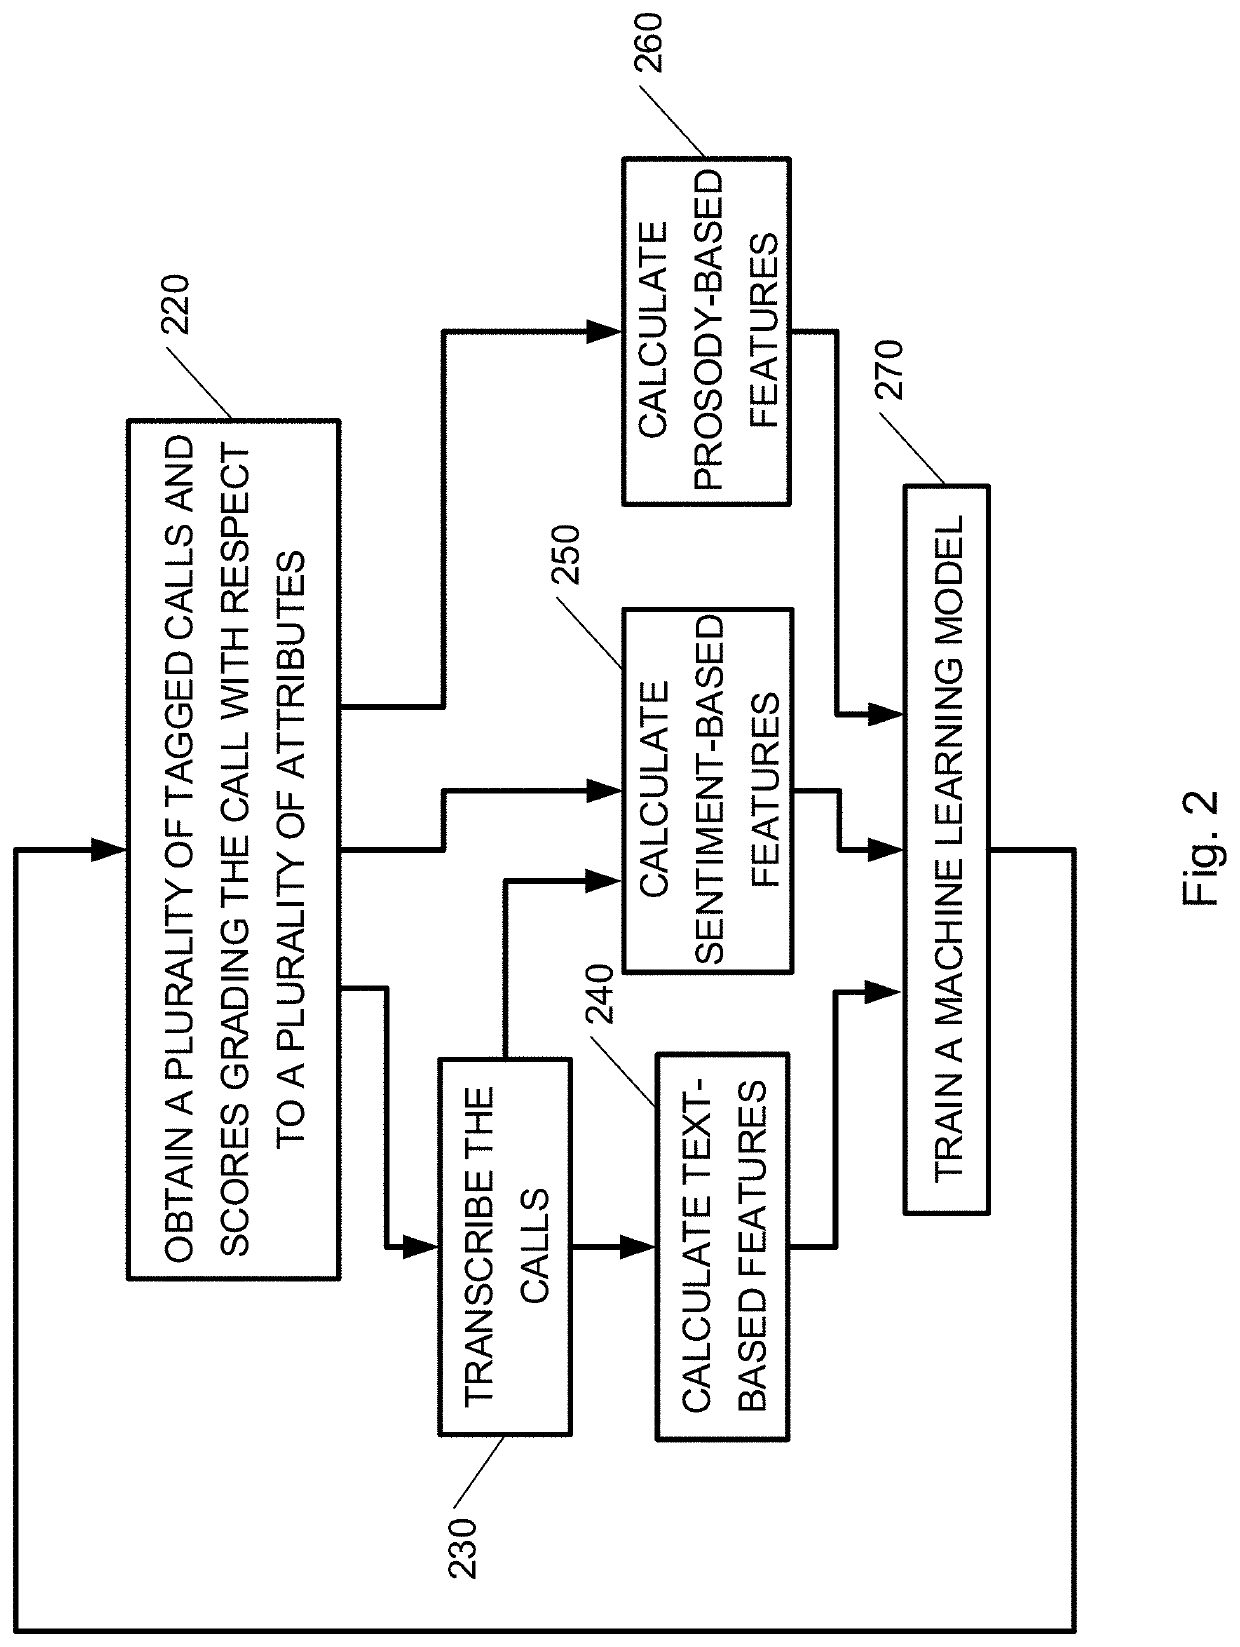 System and method for performing agent behavioral analytics